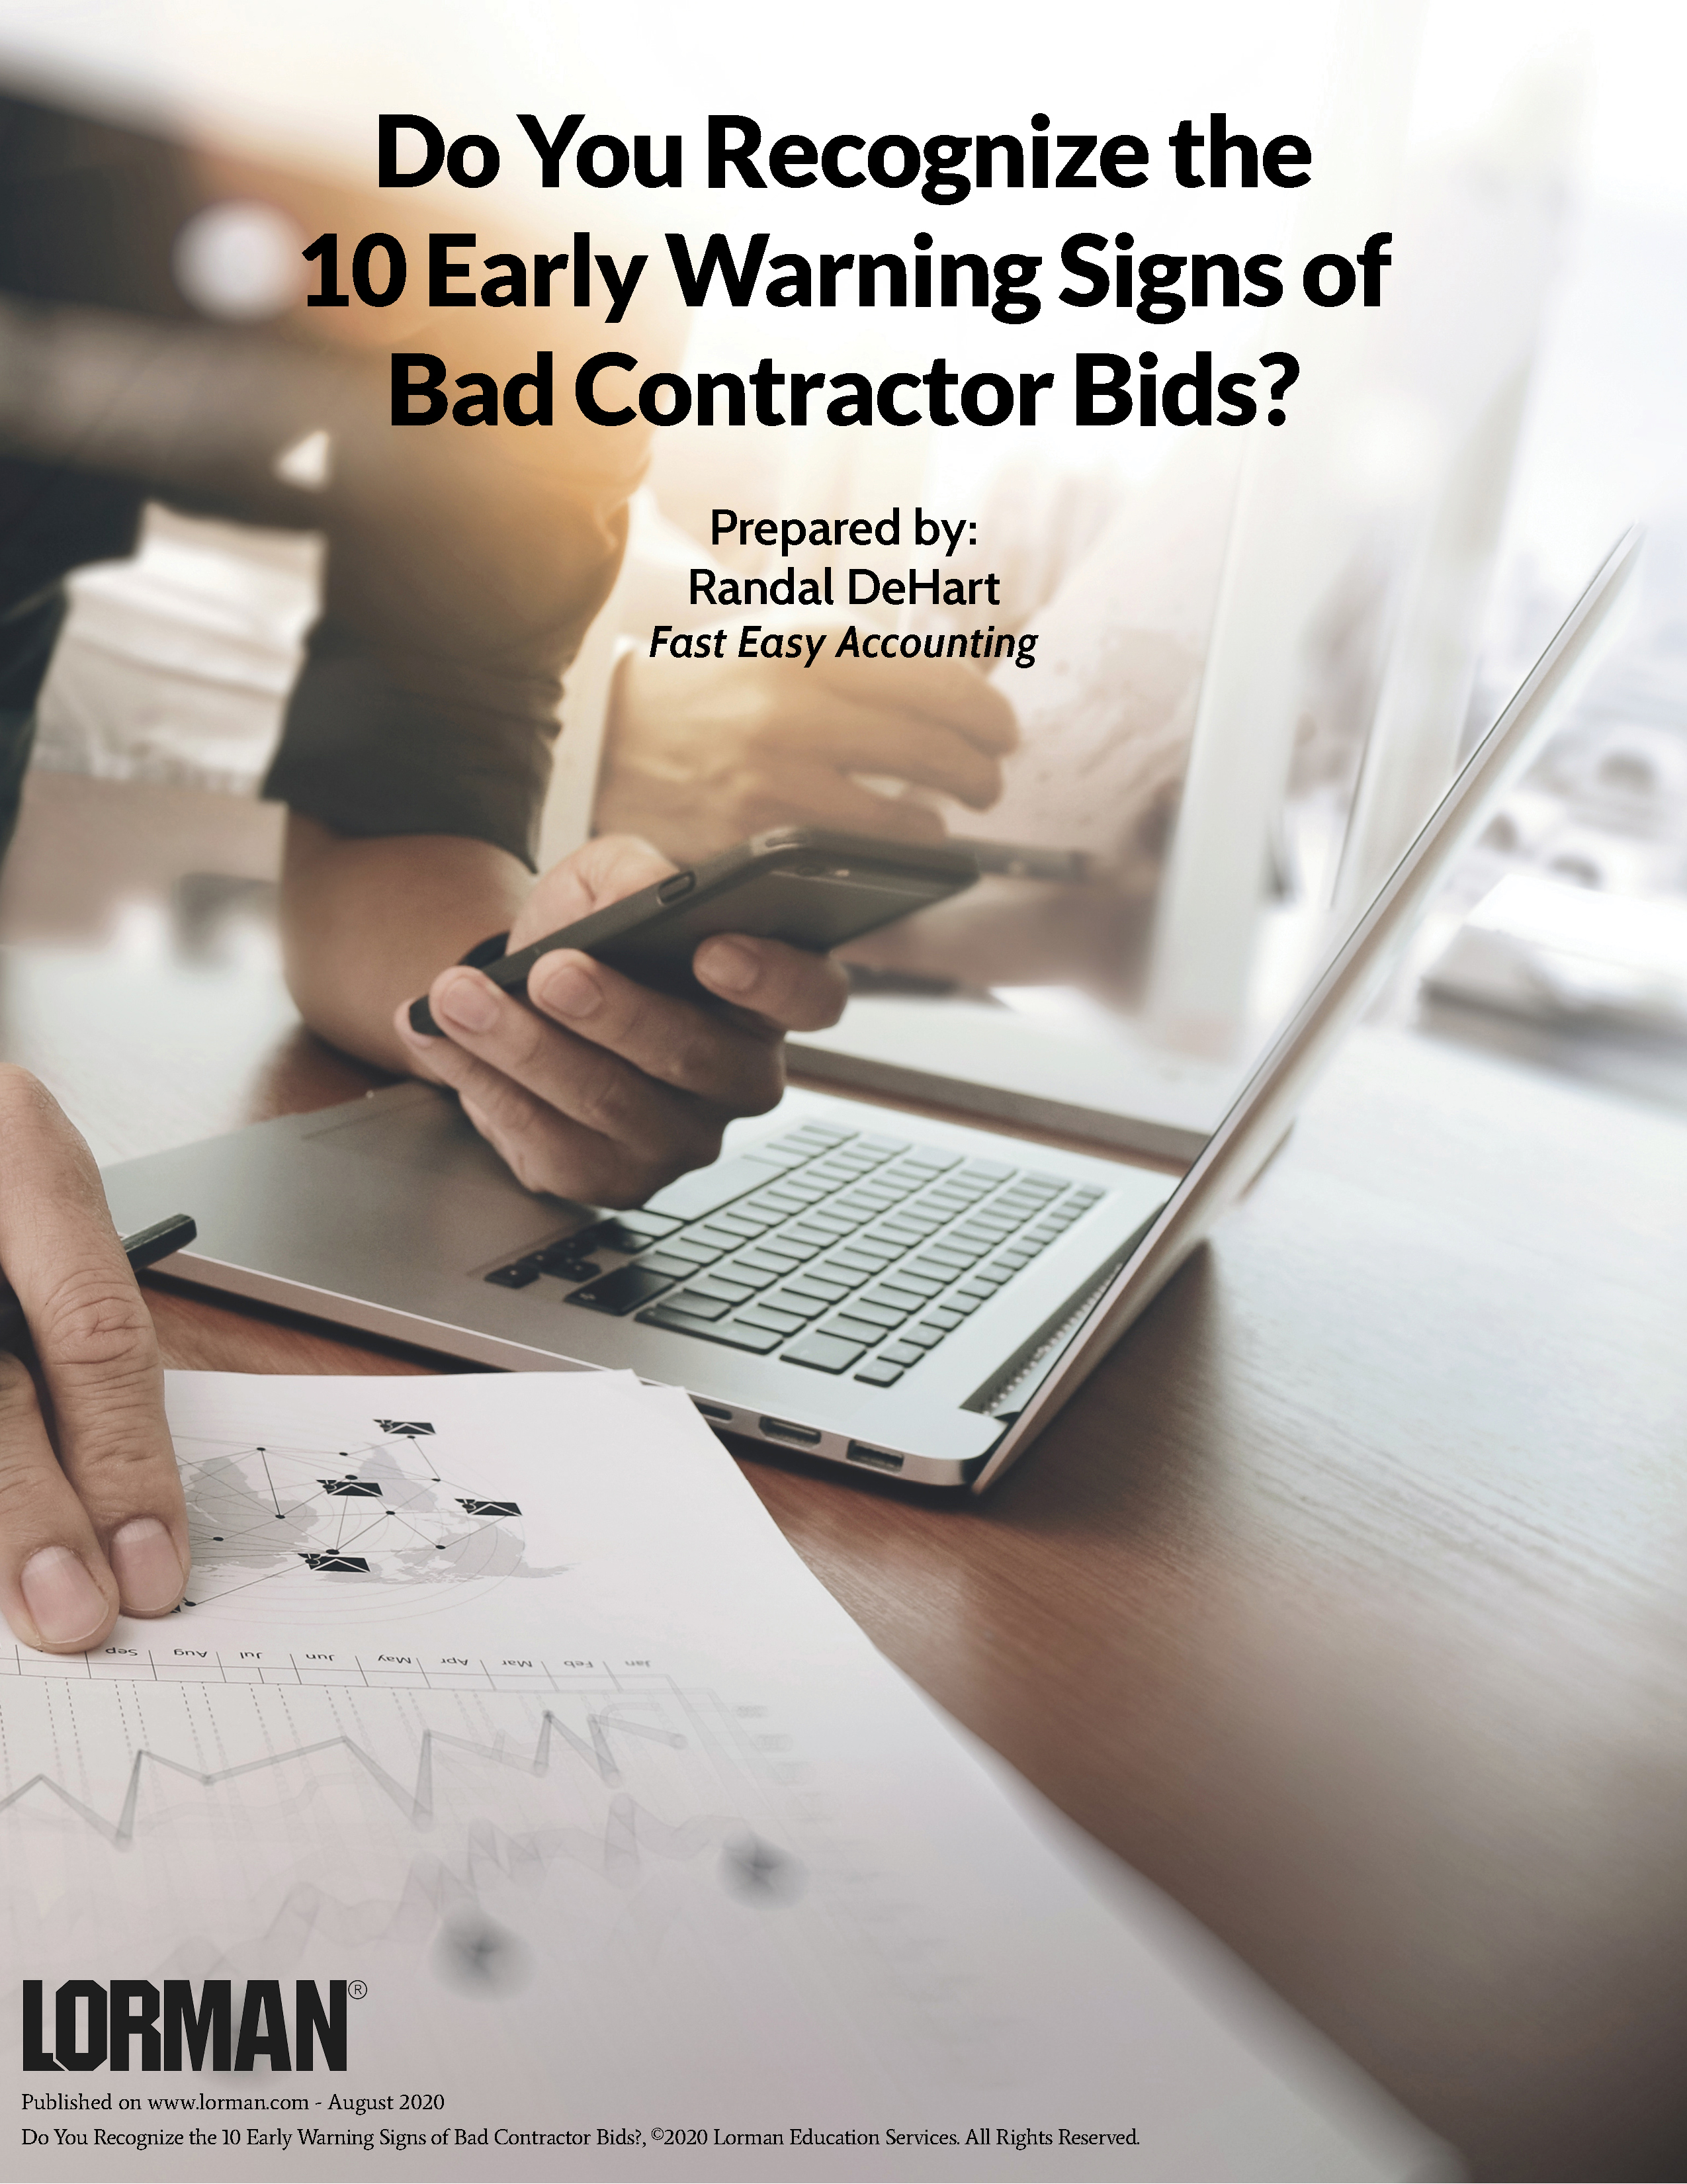 Do You Recognize the 10 Early Warning Signs of Bad Contractor Bids?